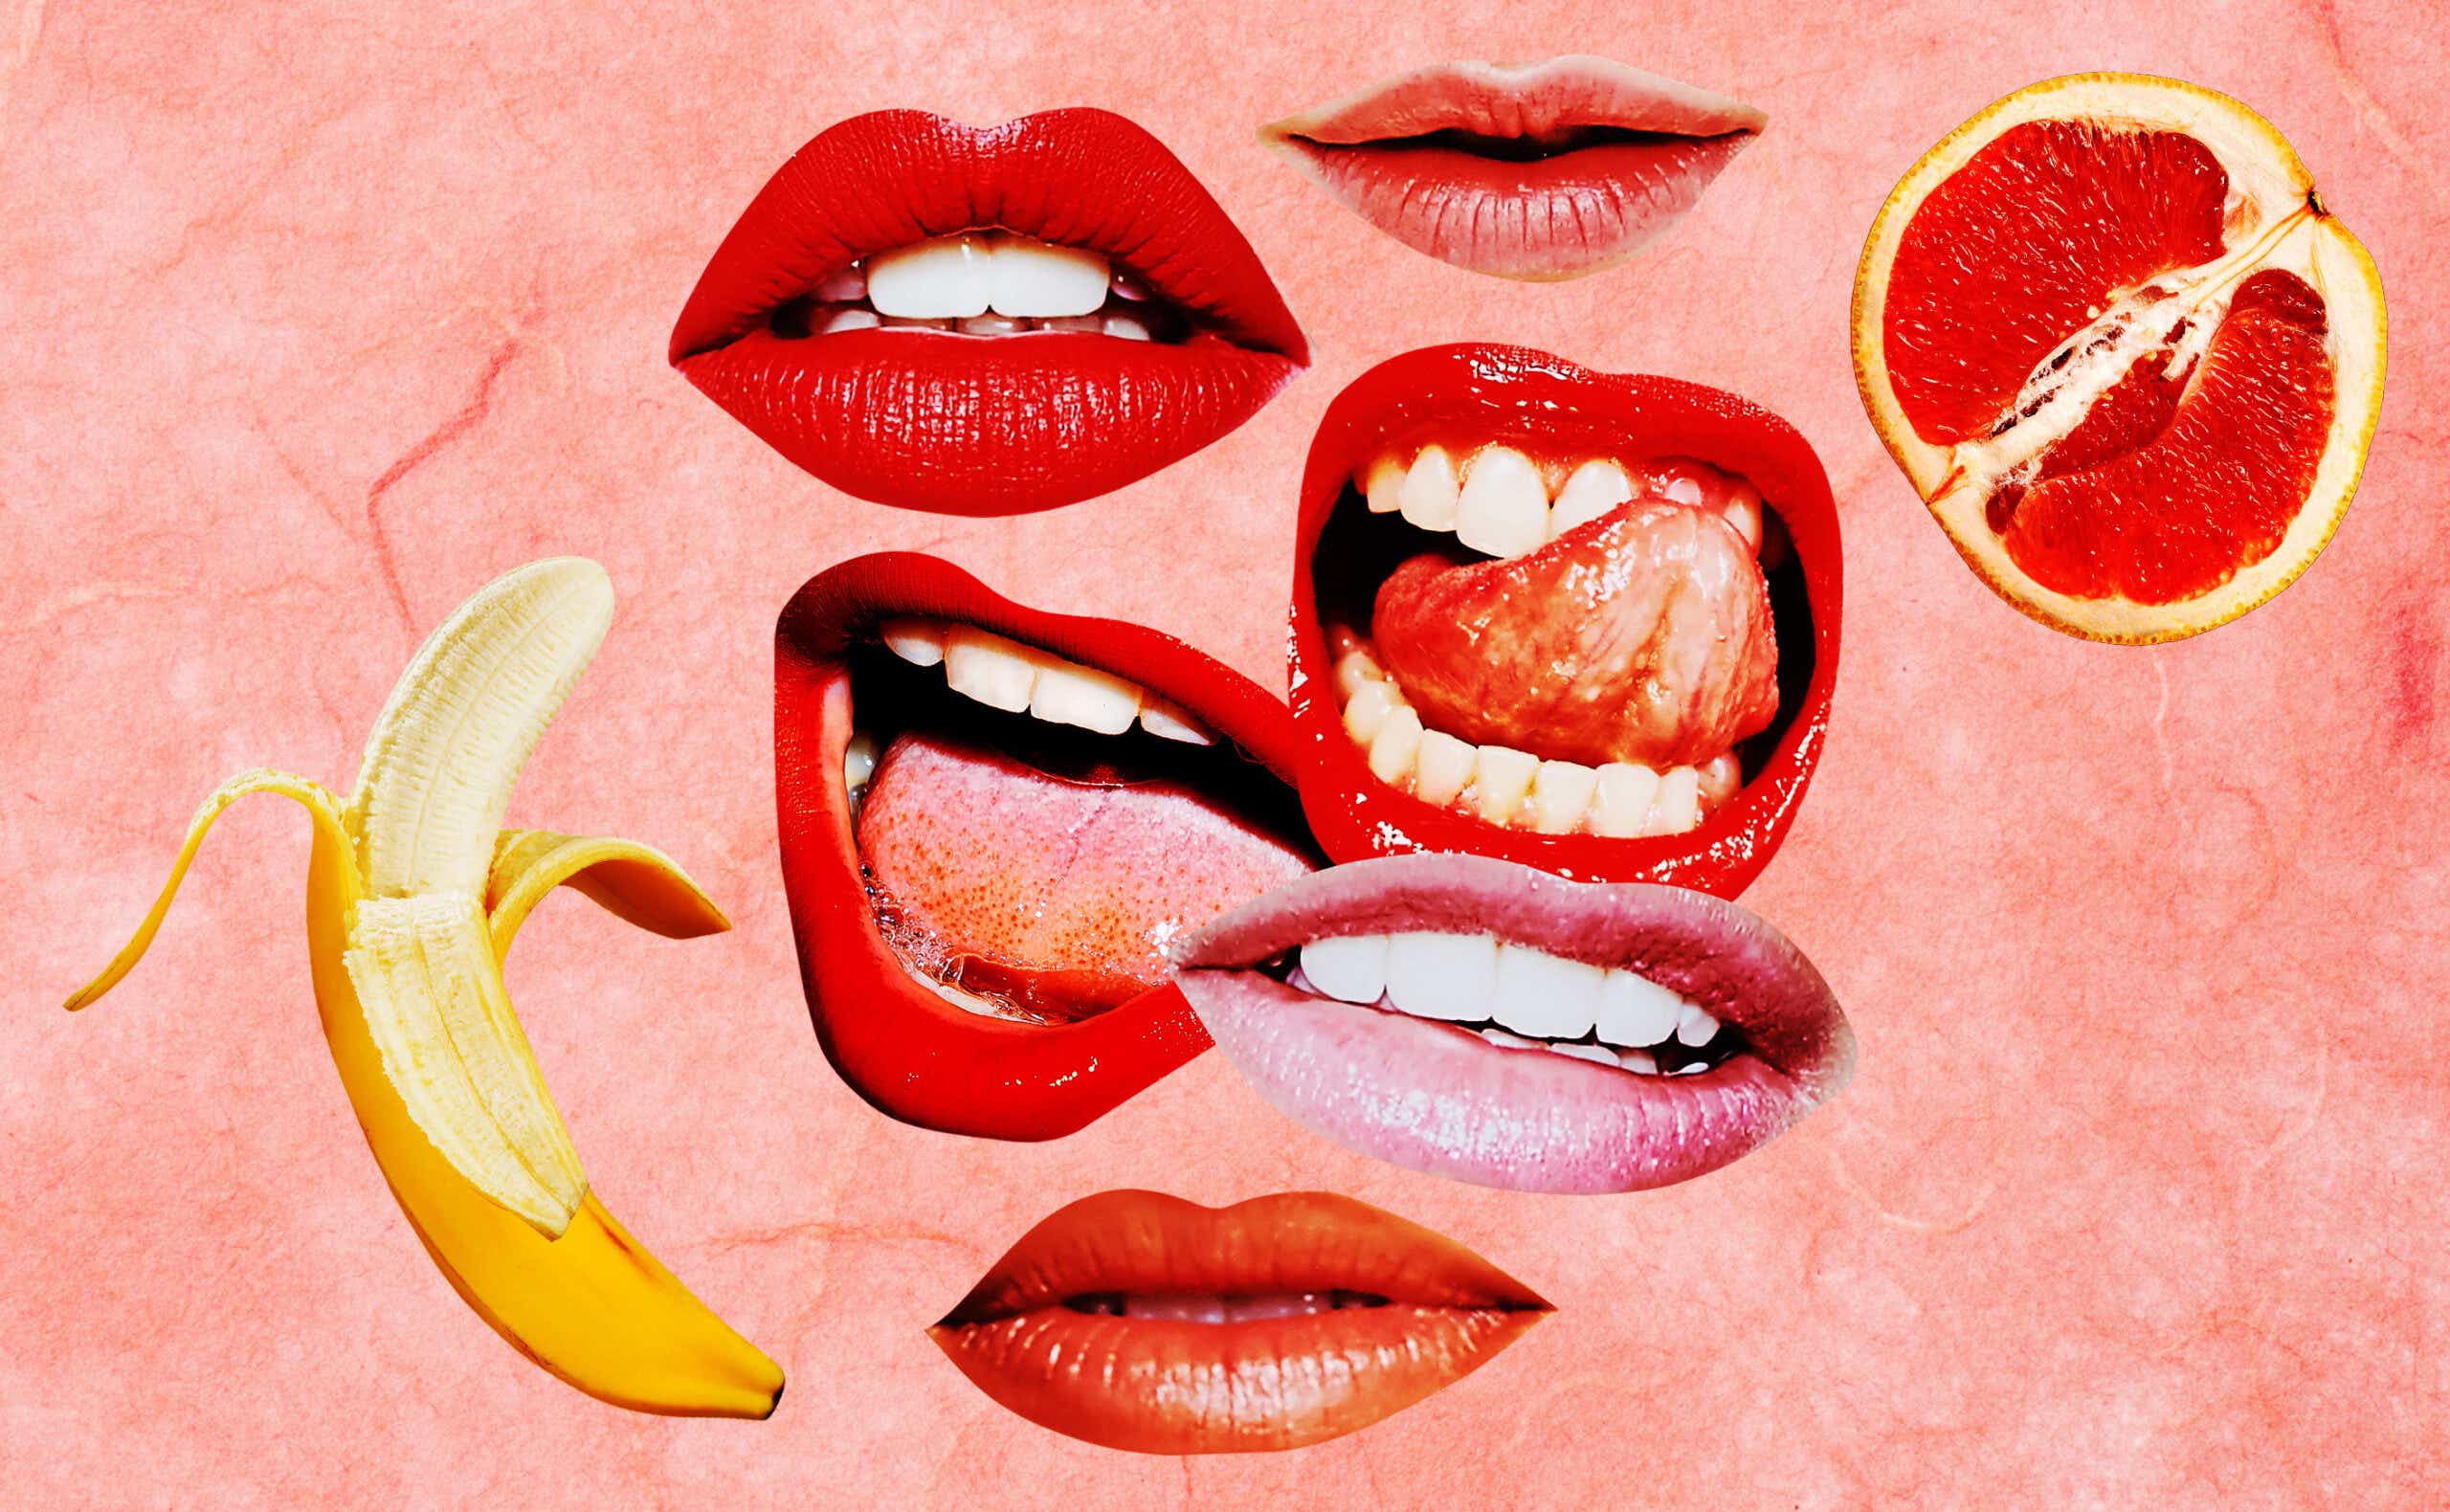 6 pairs of disembodied lips, a banana, and a grapefruit collaged together.